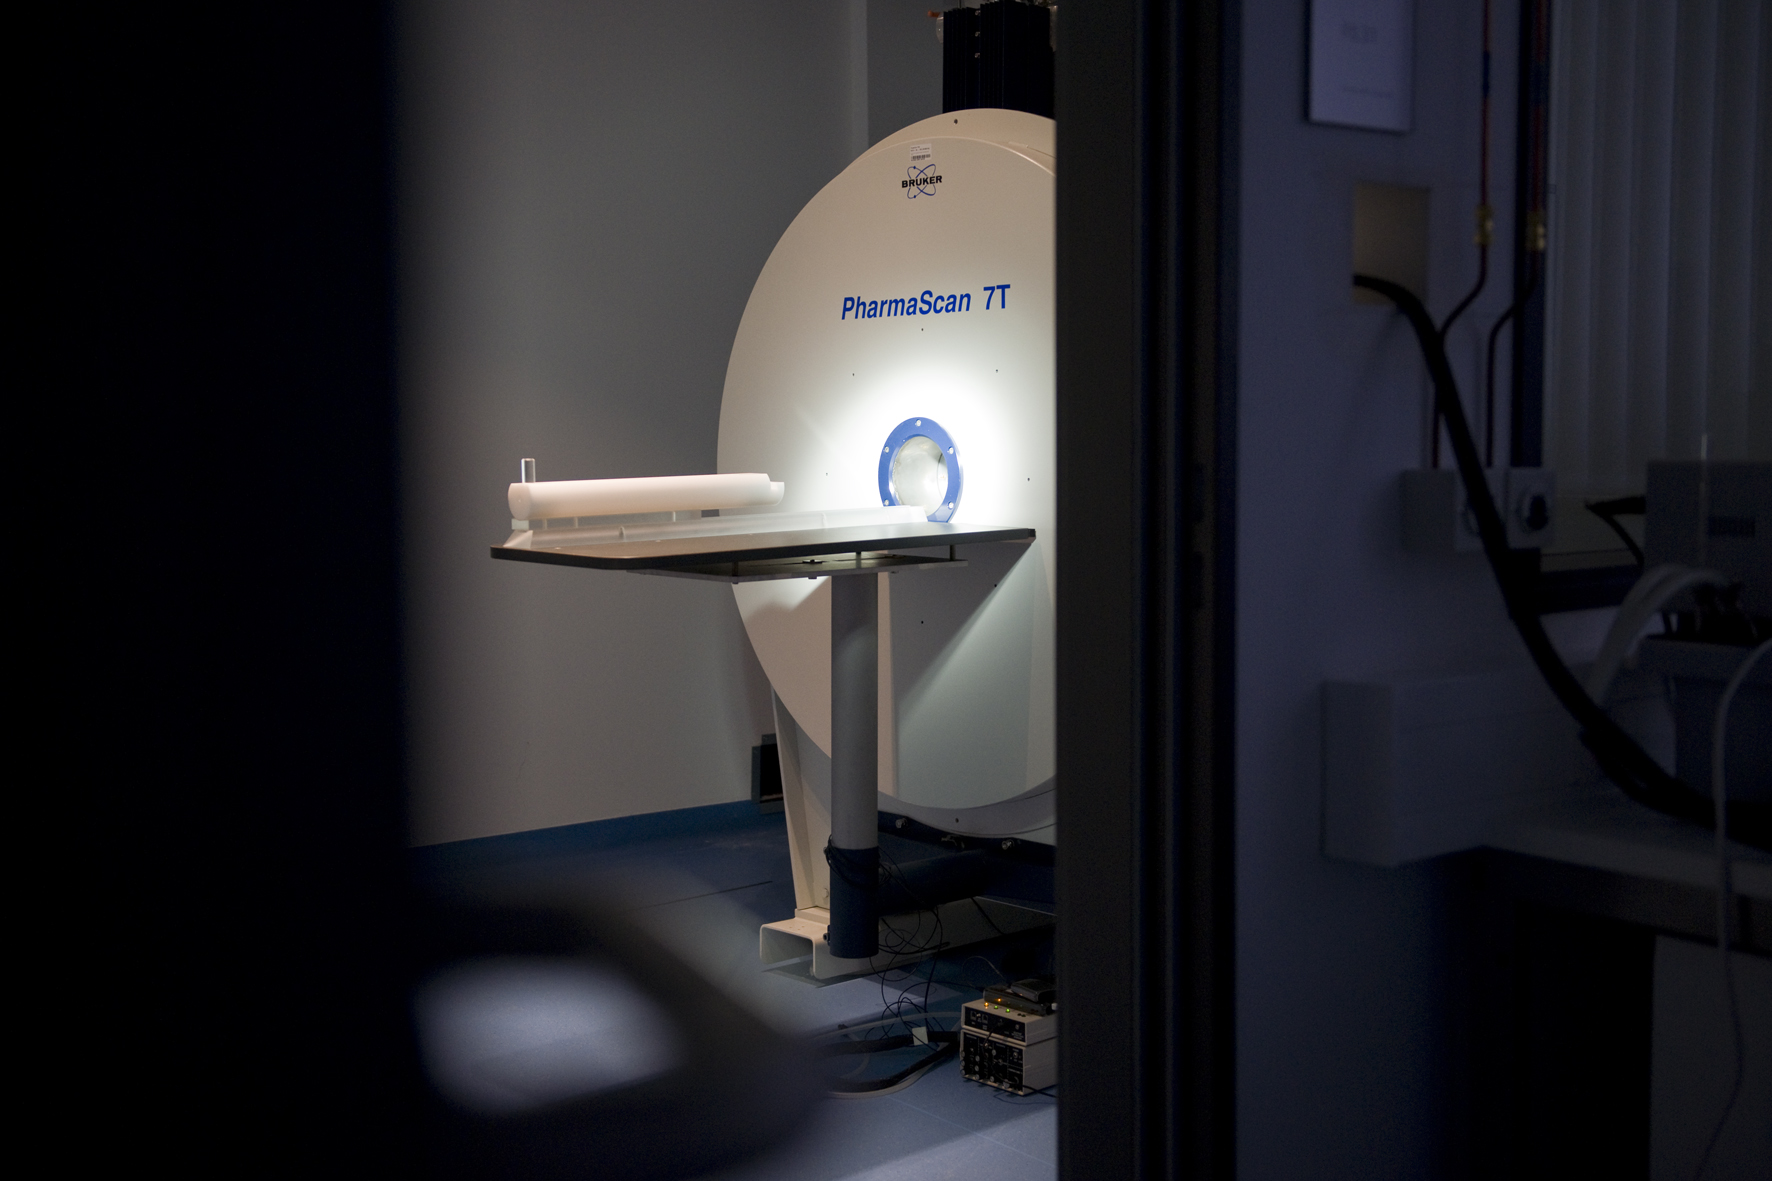 View on the high-resolution 7T small-animal MRI of Fraunhofer IZI.